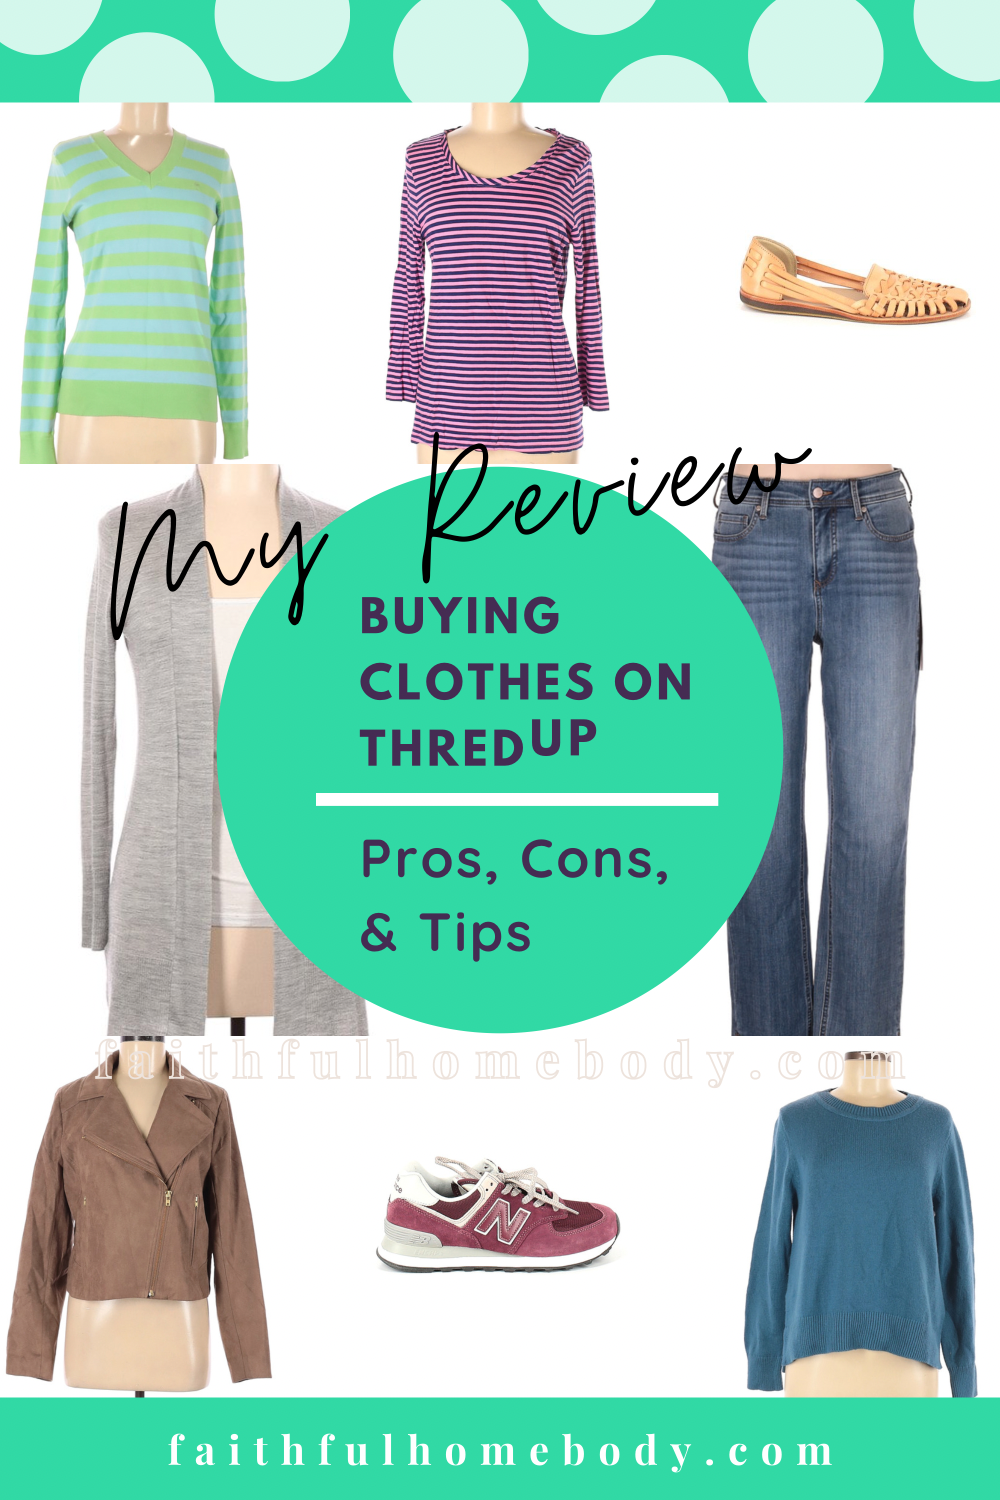 Looking to update your wardrobe and be thrifty while doing so? Here's my unsponsored review of buying clothes on thredUP. Pros|Cons|Tips